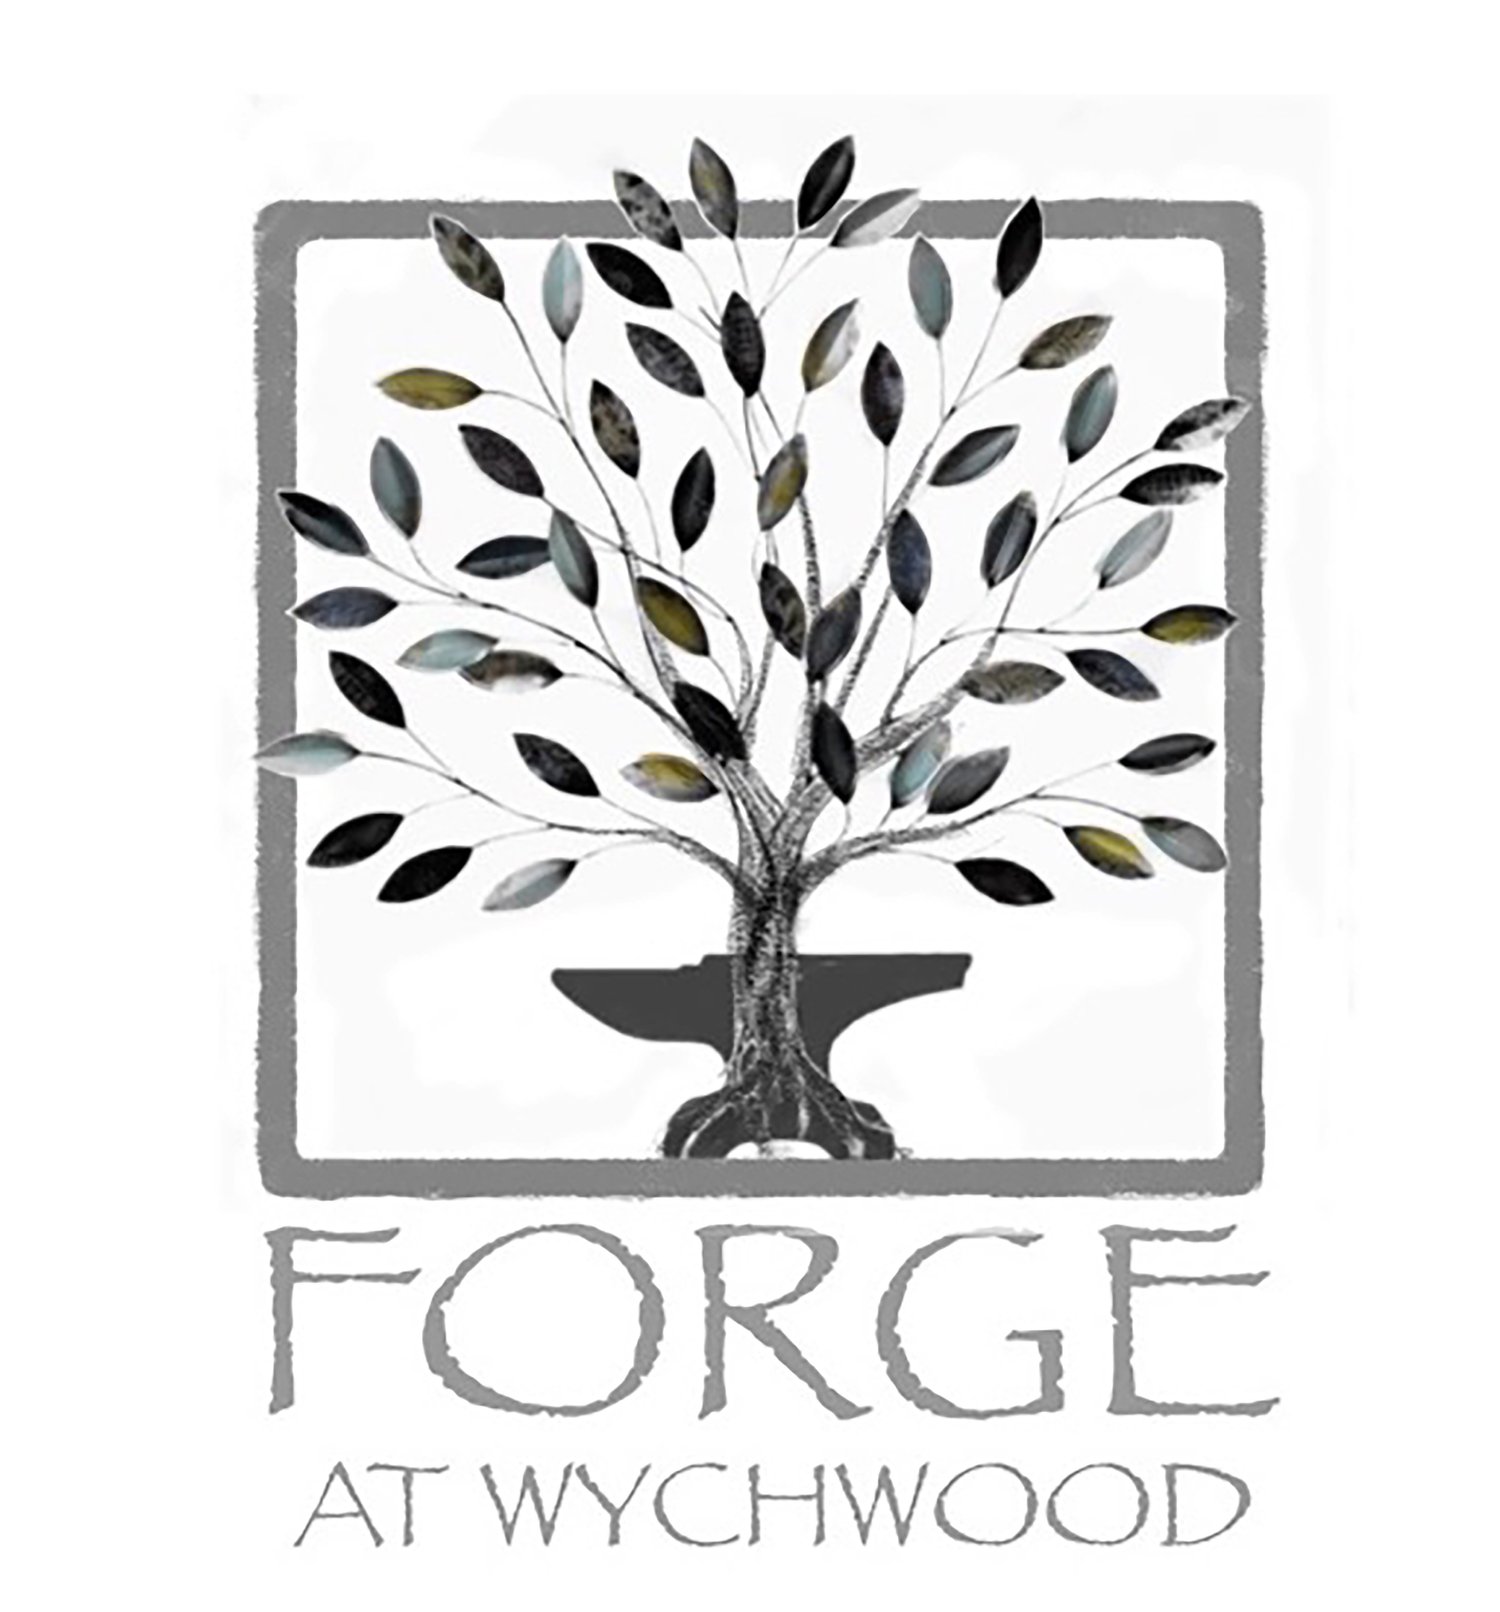 Forge Gallery at Wychwood